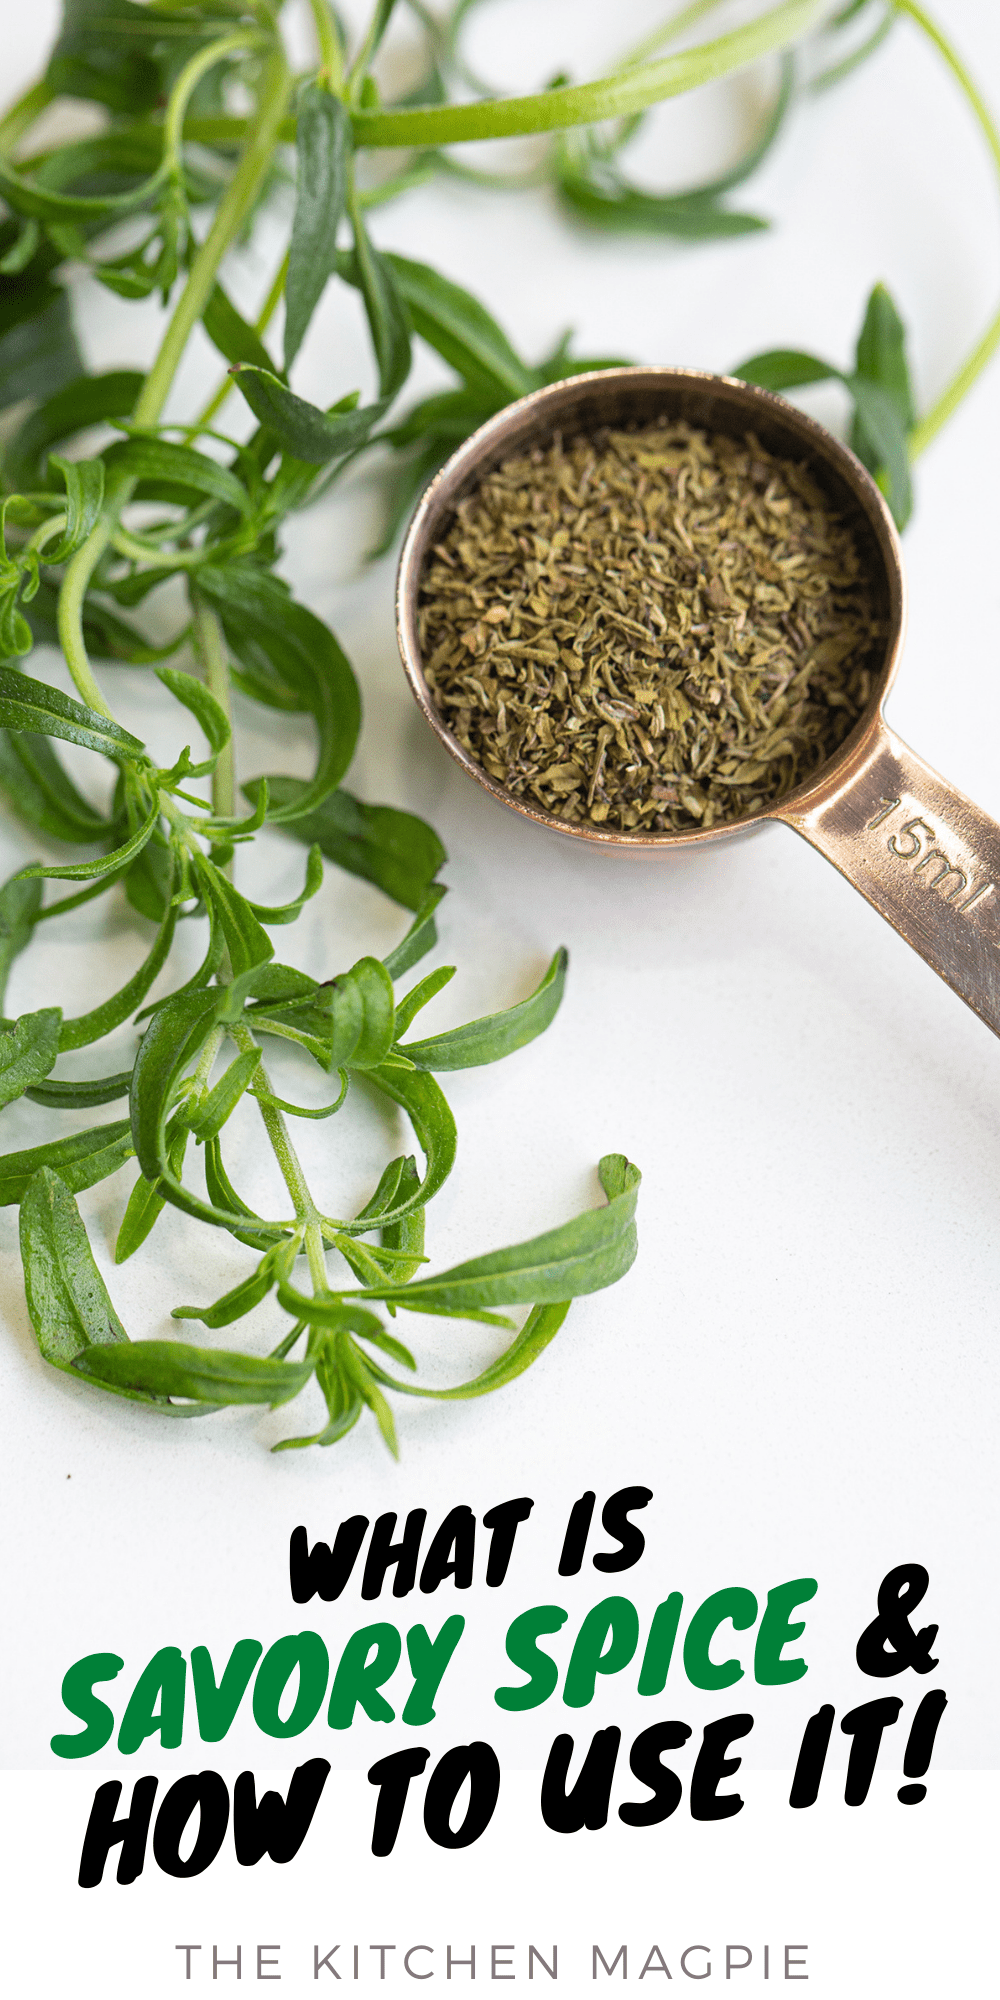 If you have spent any amount of time trawling through cookbooks and culinary websites looking for dinner inspiration, you will likely have come across the confusingly named herb Savory. Here's everything you need to know about it! 